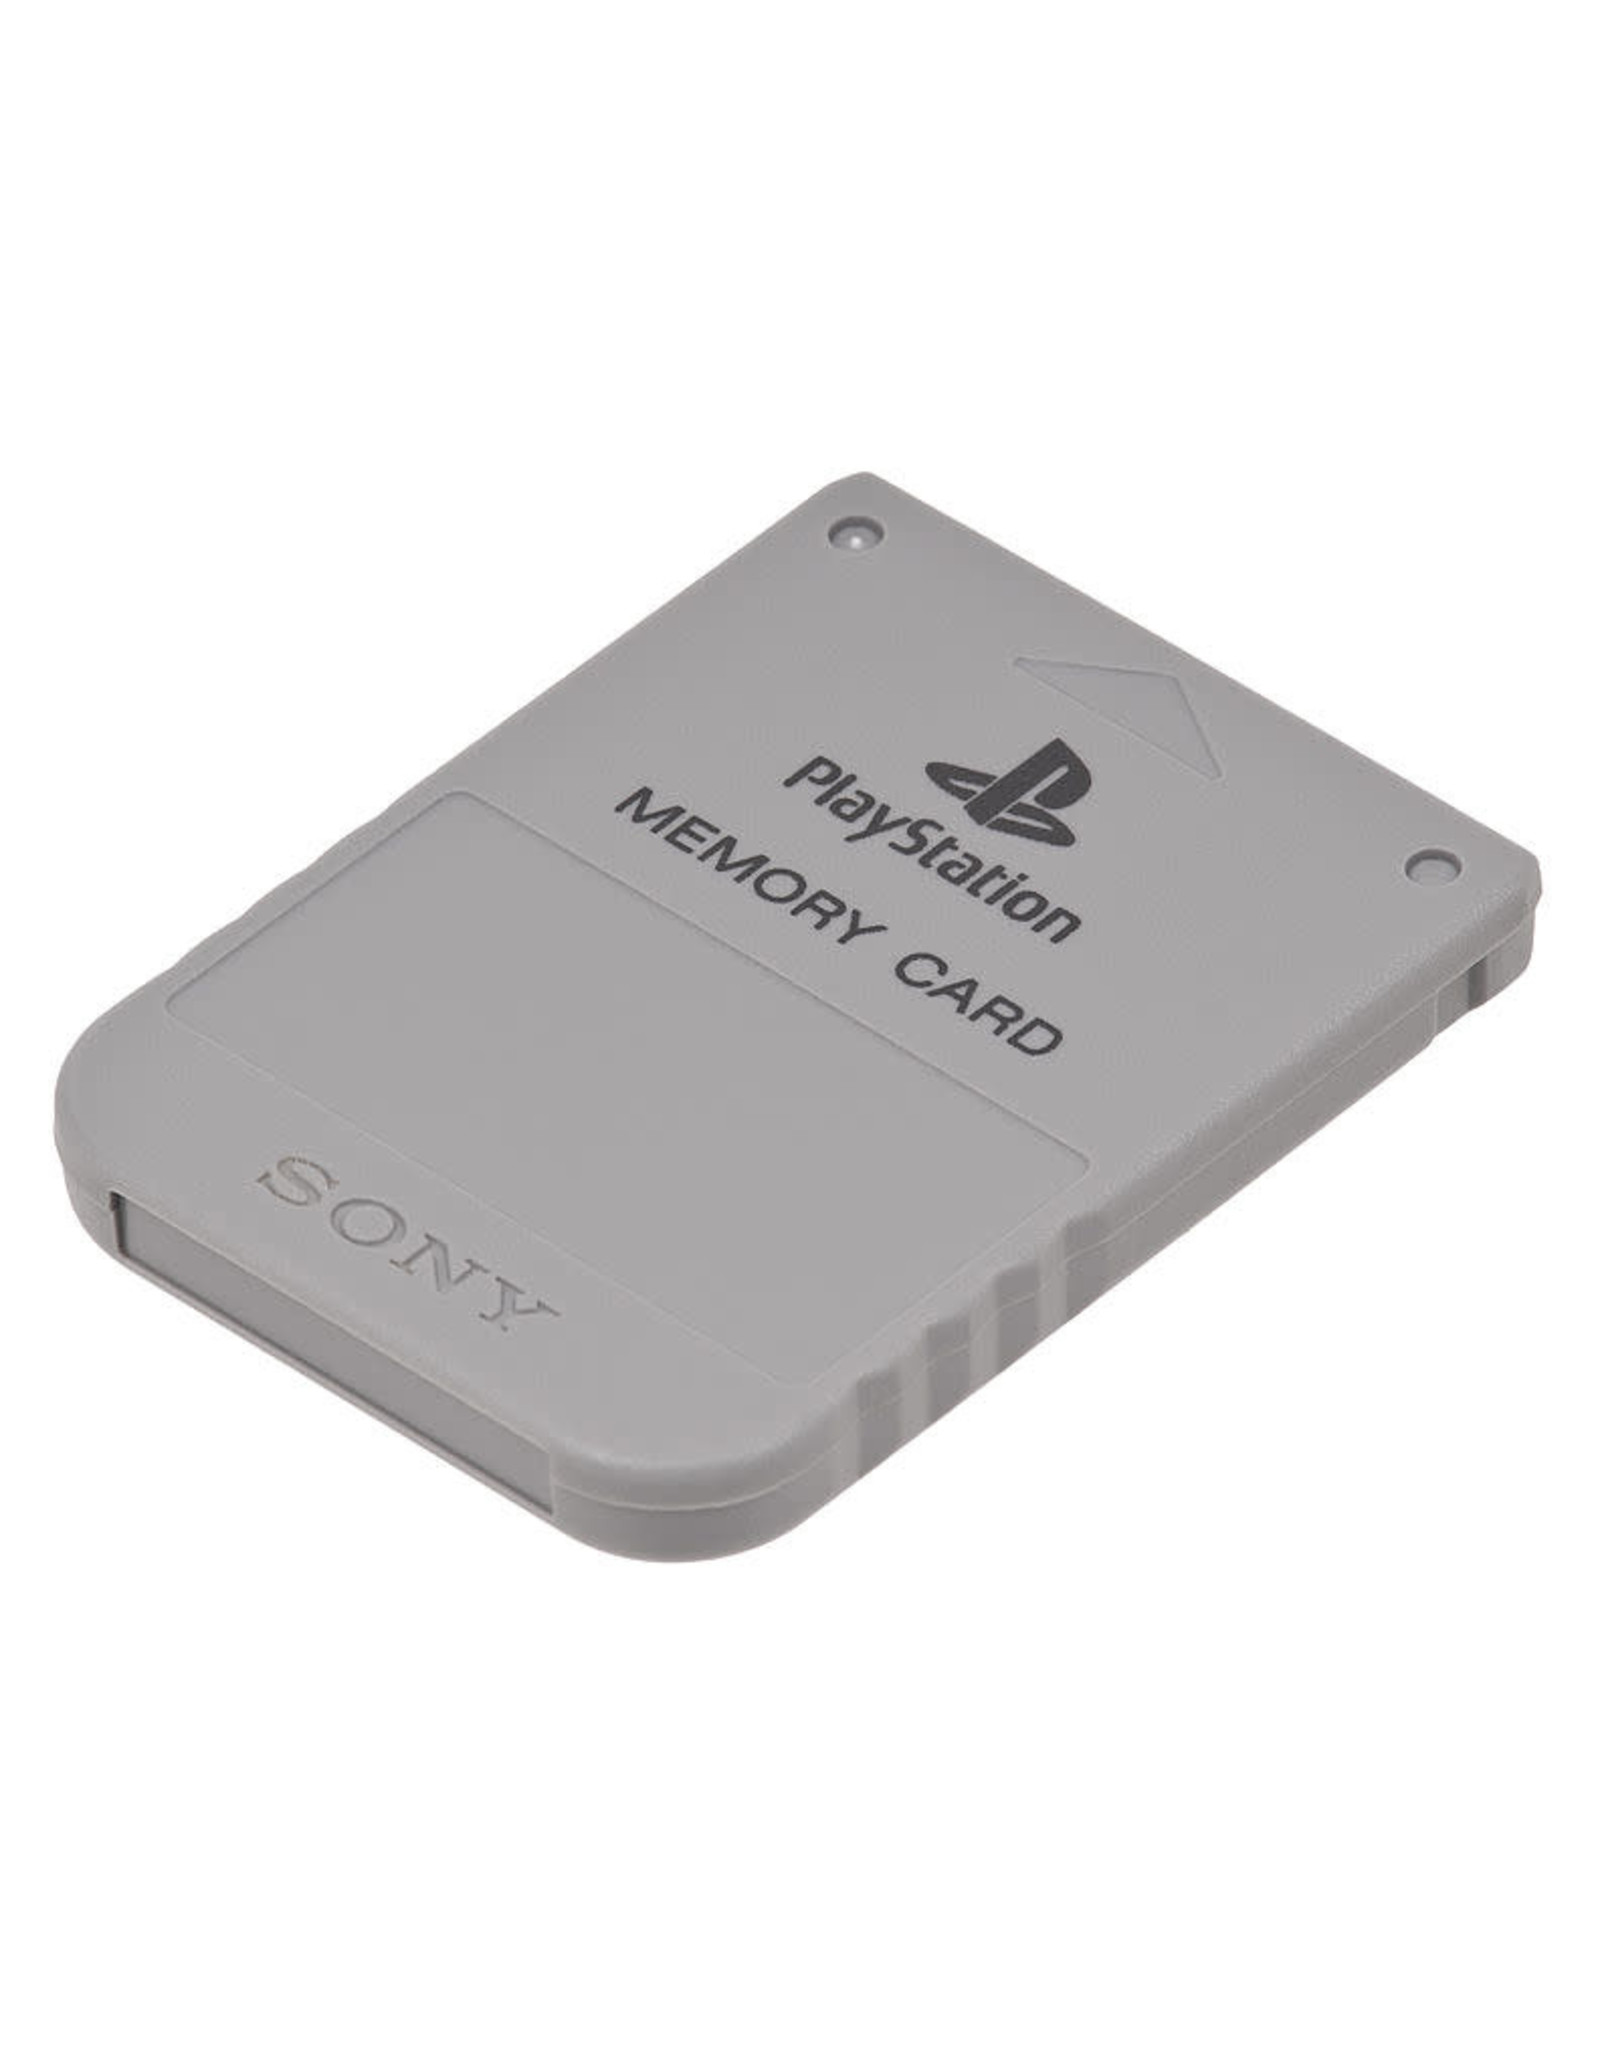 Playstation Playstation PS1 Memory Card (OEM, Assorted Colors, Cosmetic Damage)